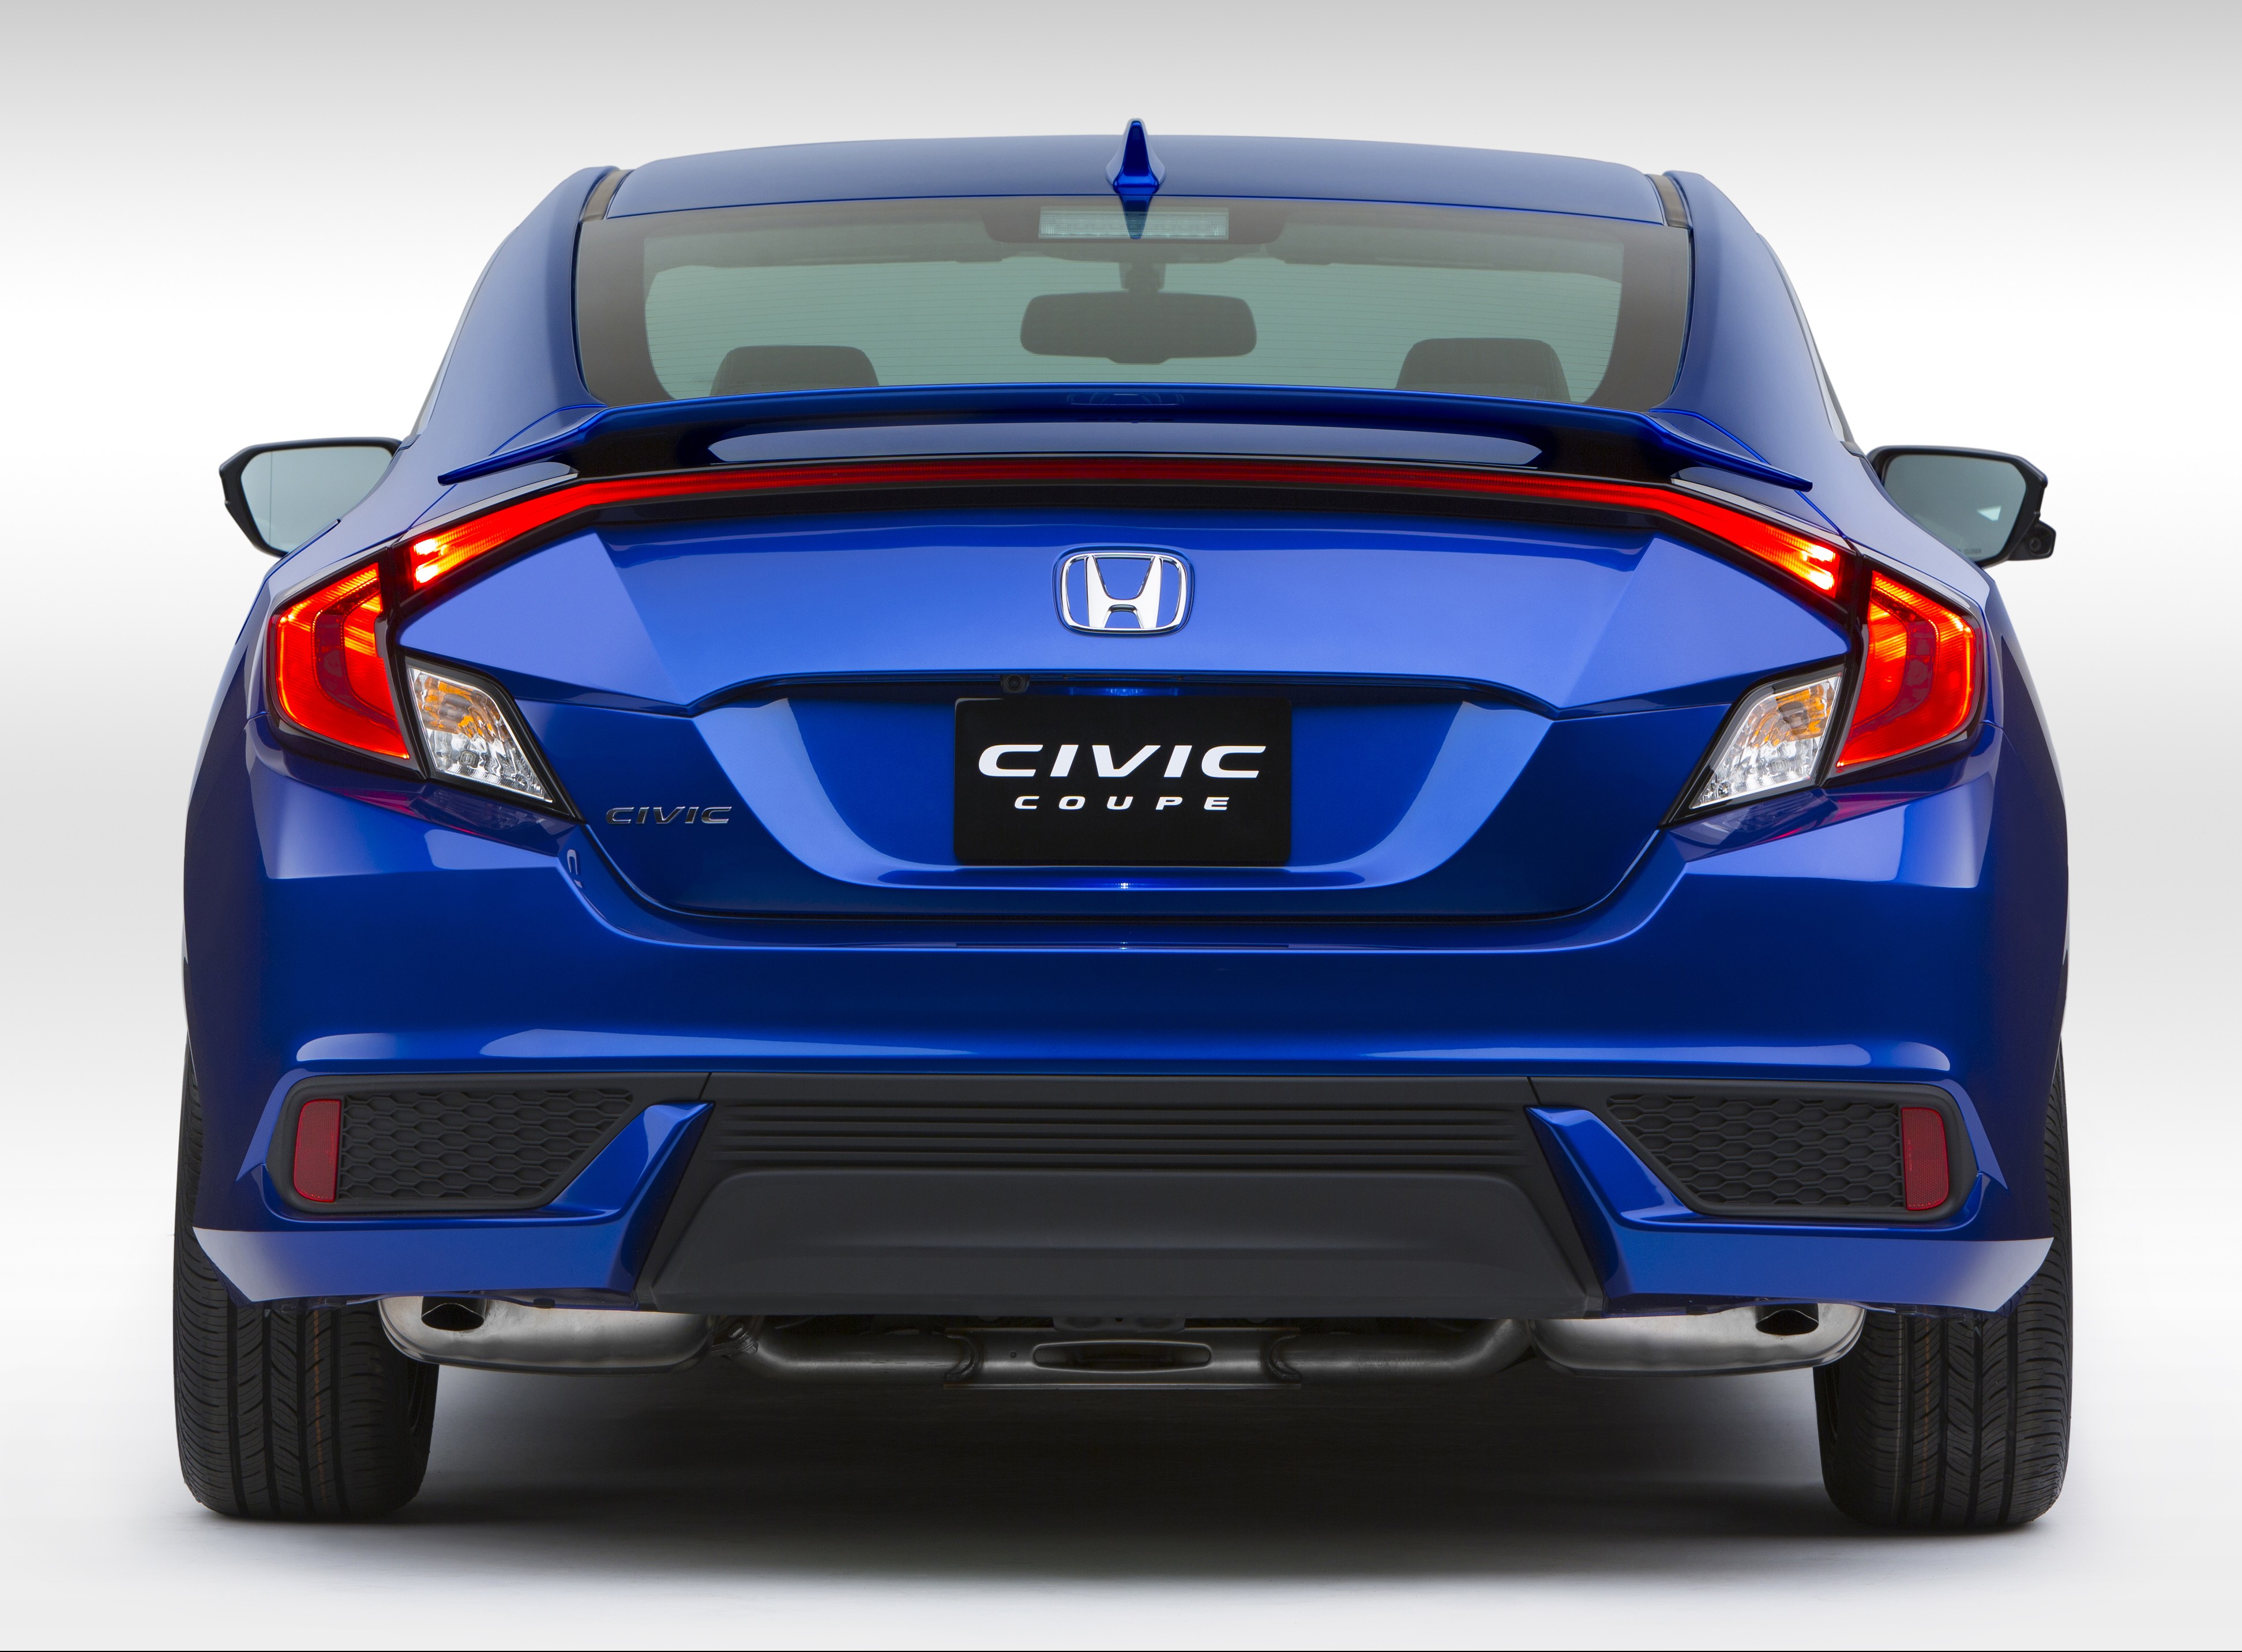 Honda Civic Coupe best specifications